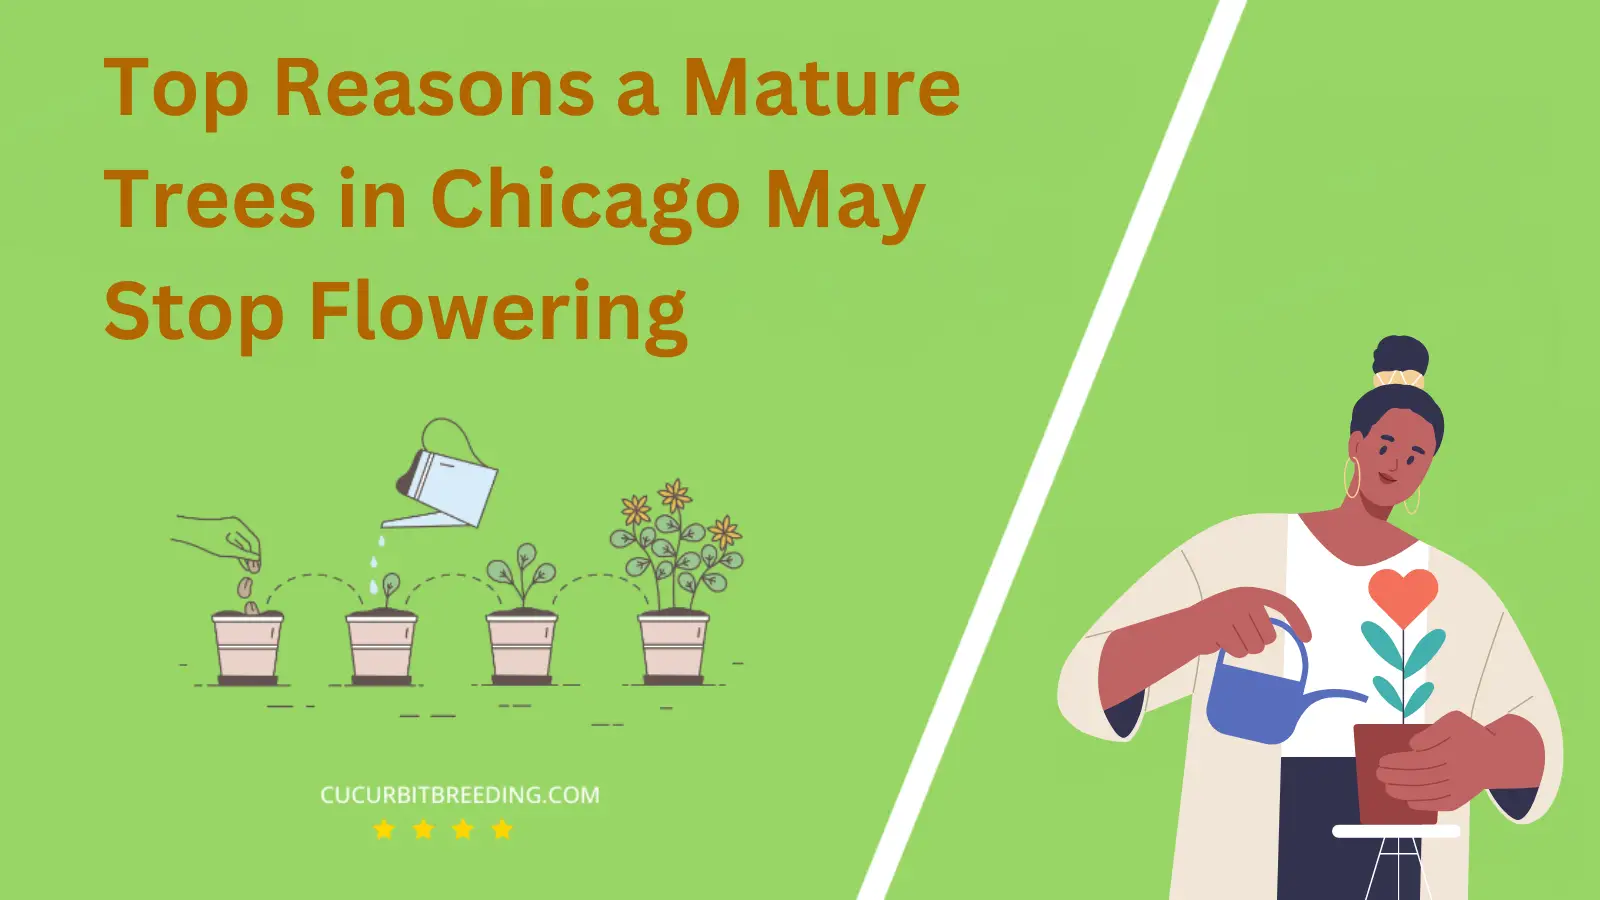 Top Reasons a Mature Trees in Chicago May Stop Flowering